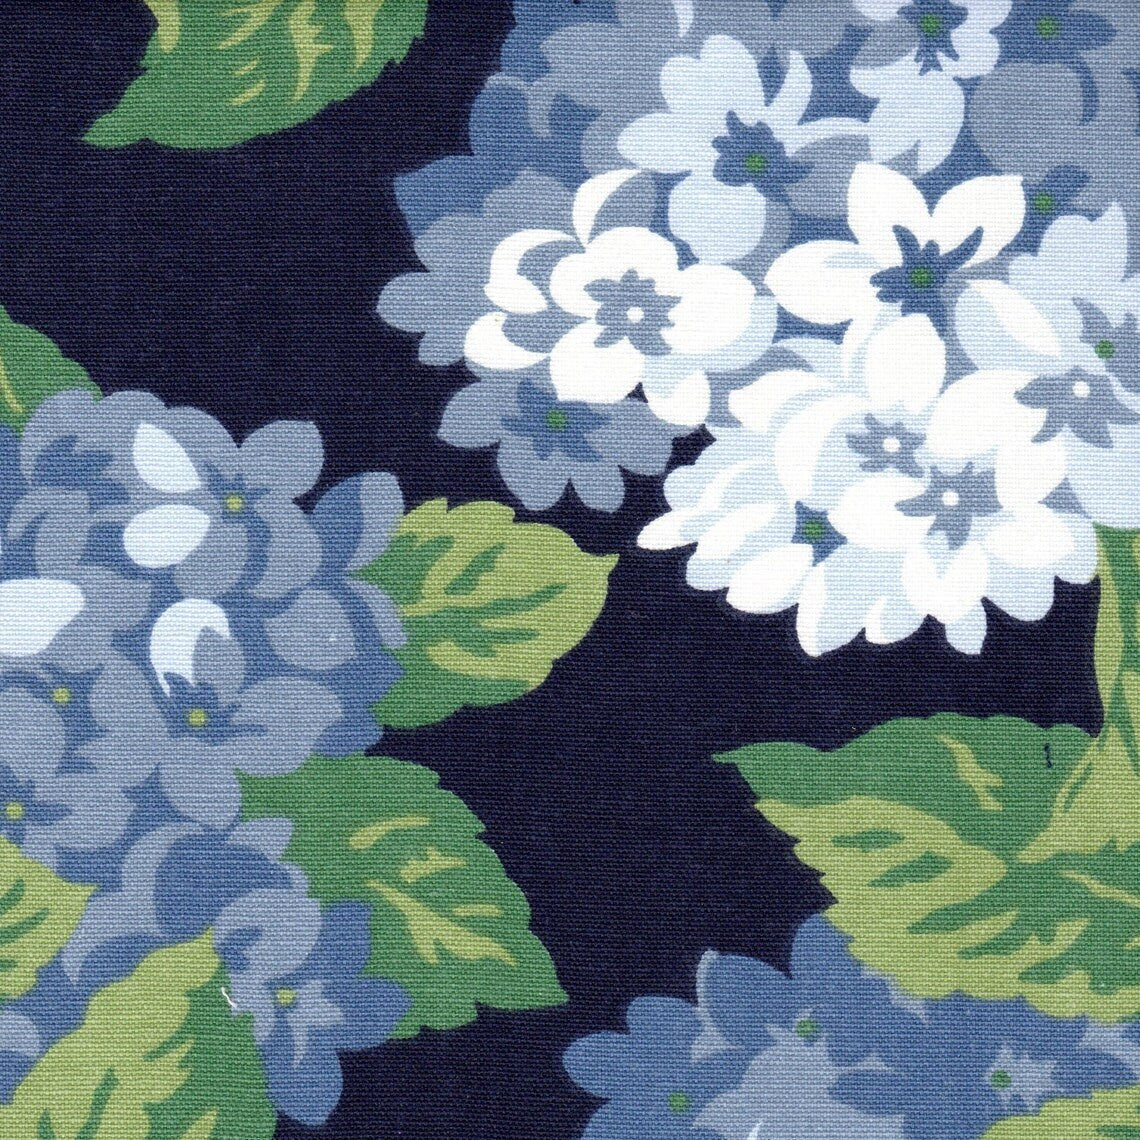 tie-up valance in summerwind navy blue hydrangea floral, large scale